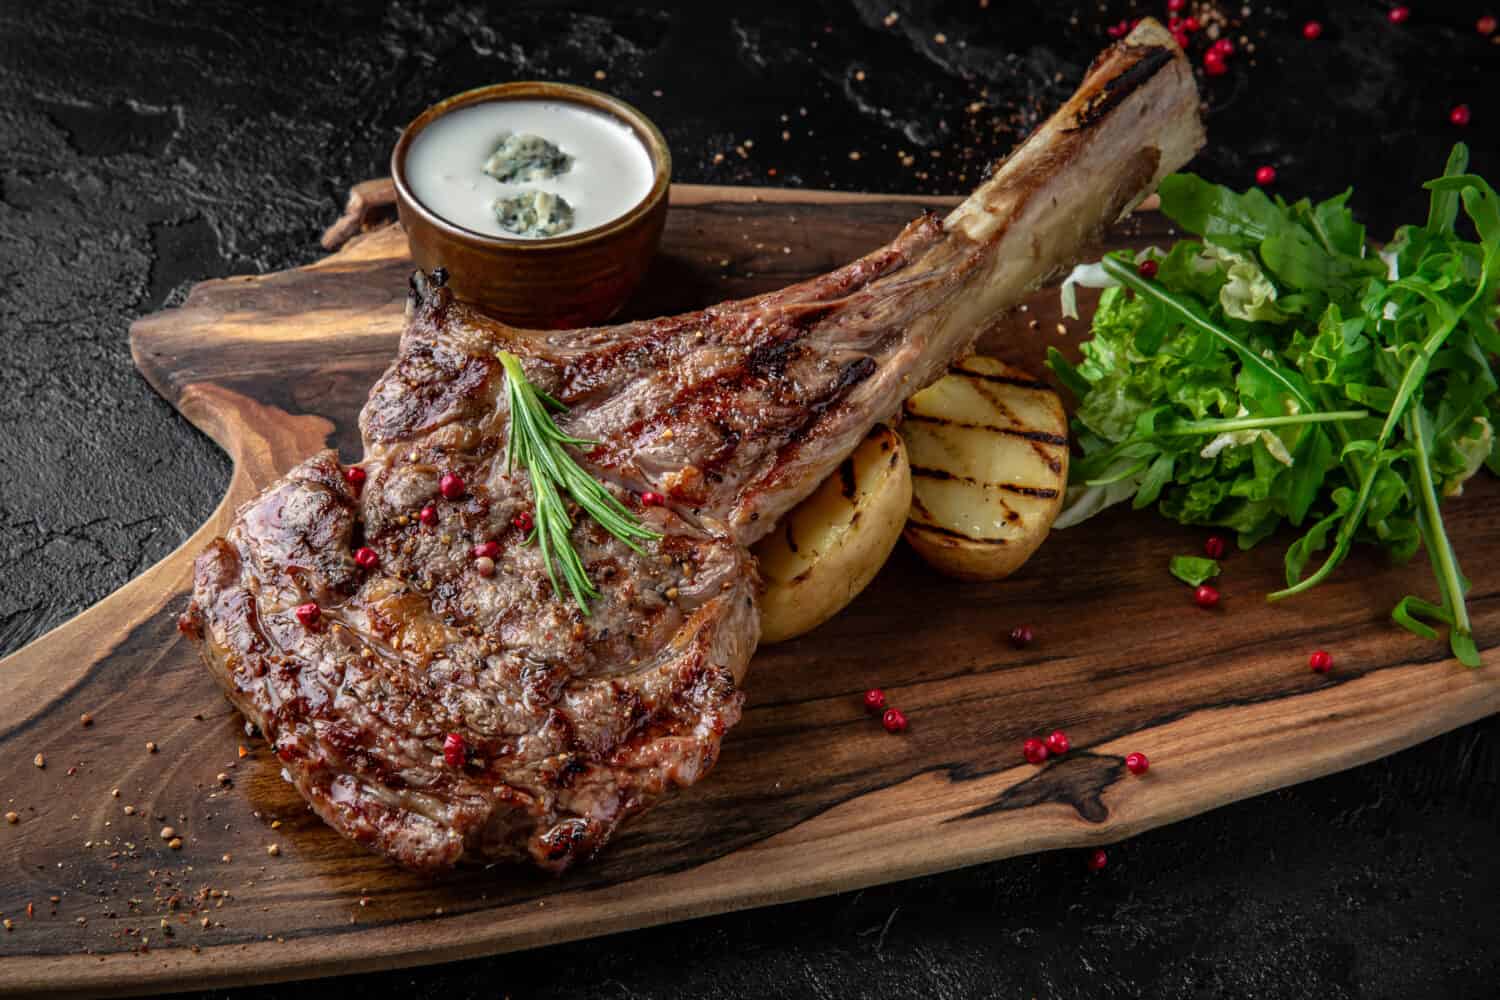 Juicy delicious ribeye or tomahawk steak on the bone with baked potatoes, spices and herbs. Hearty meat dish